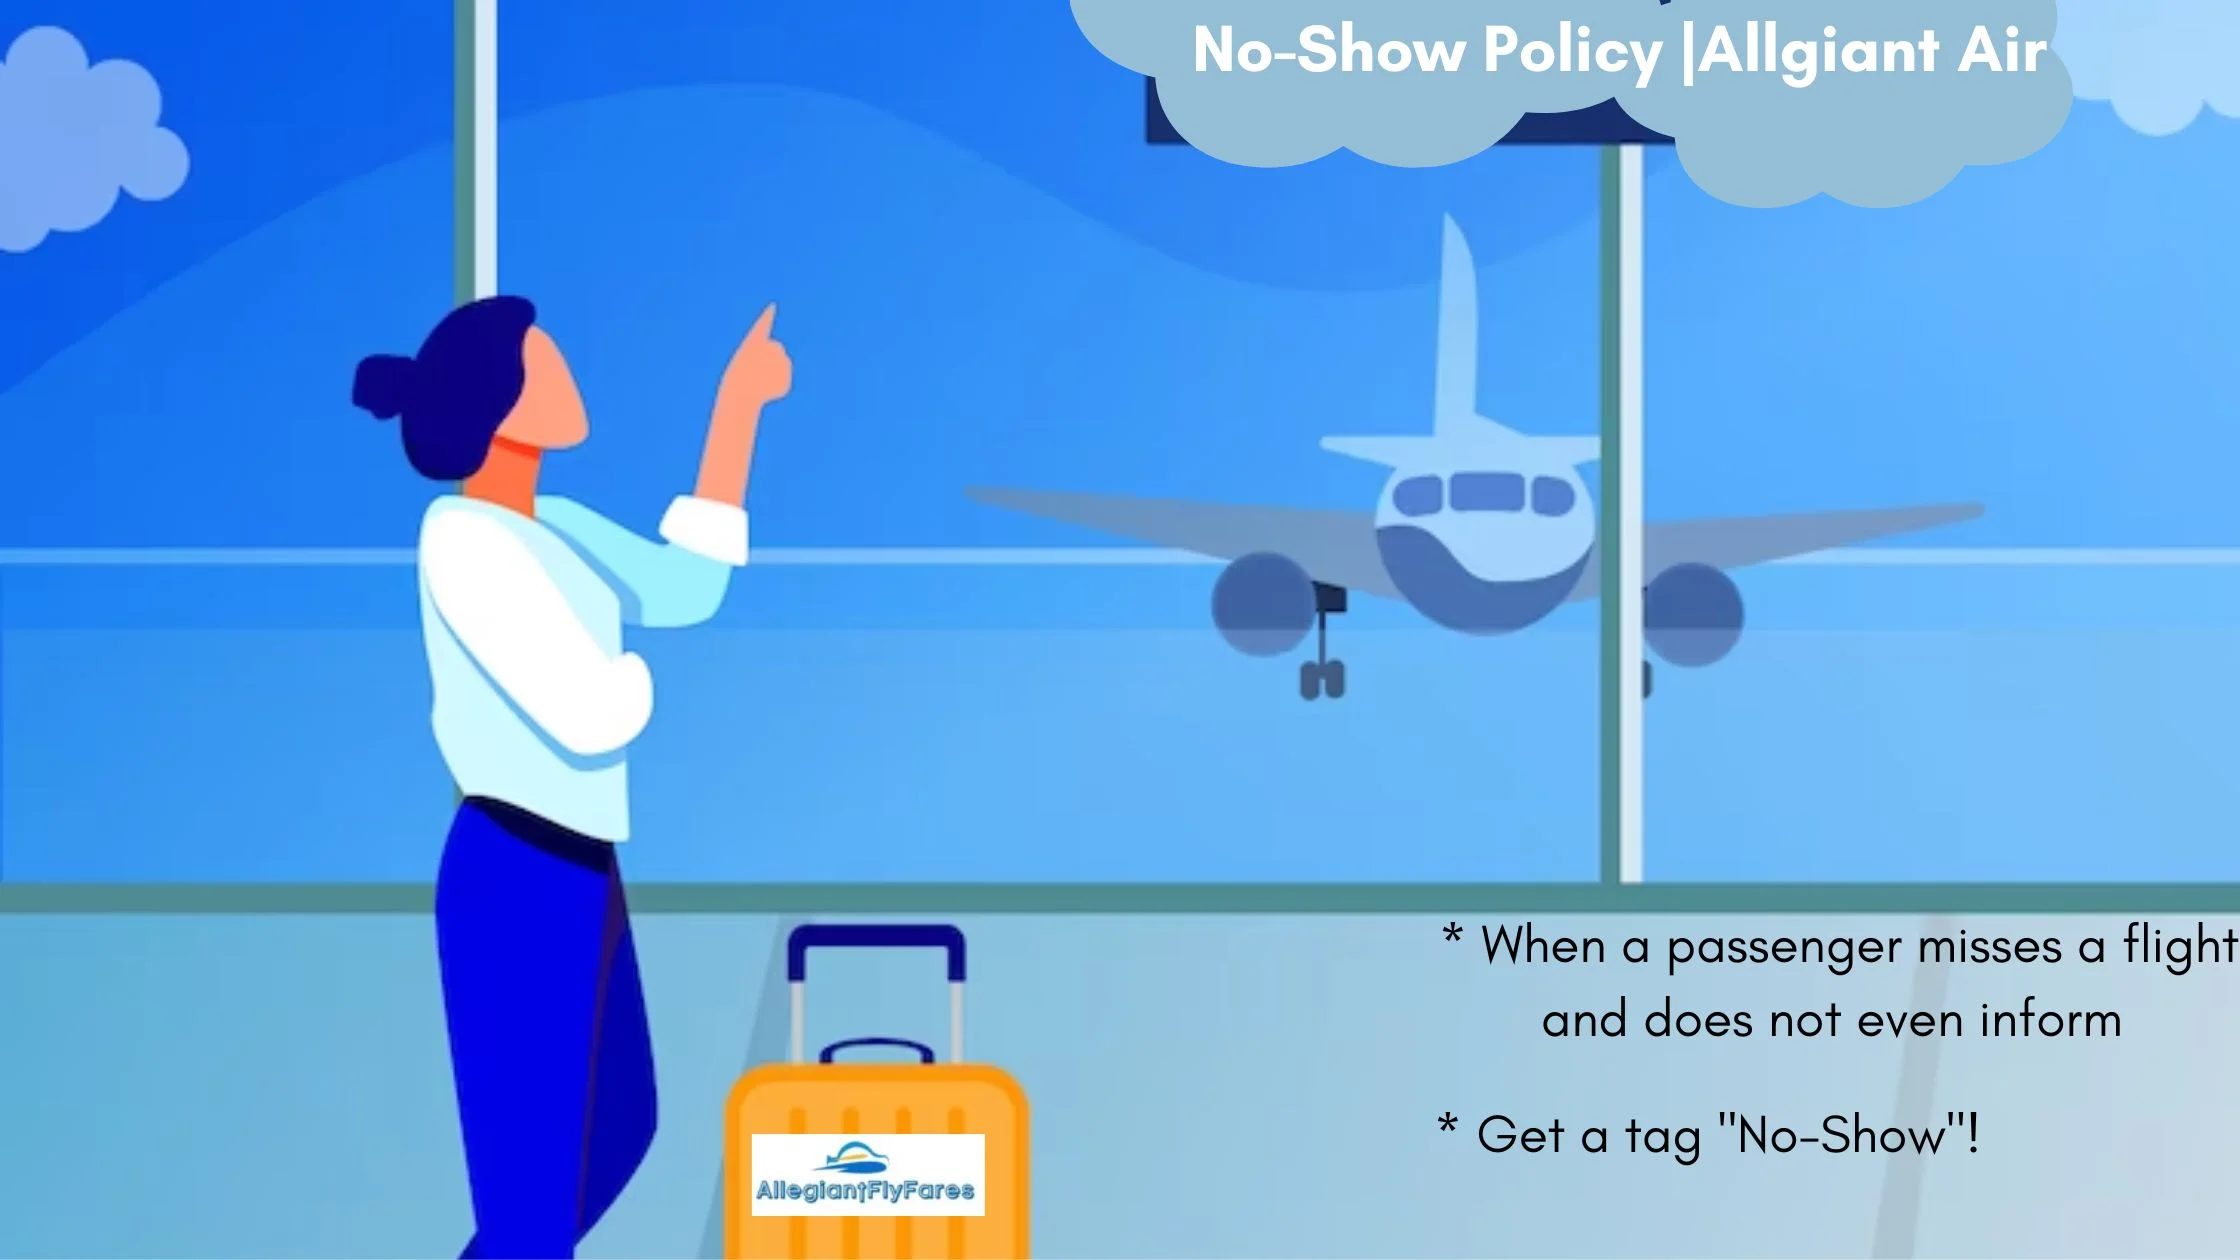 No-Show Policy of Allegiant Airlines